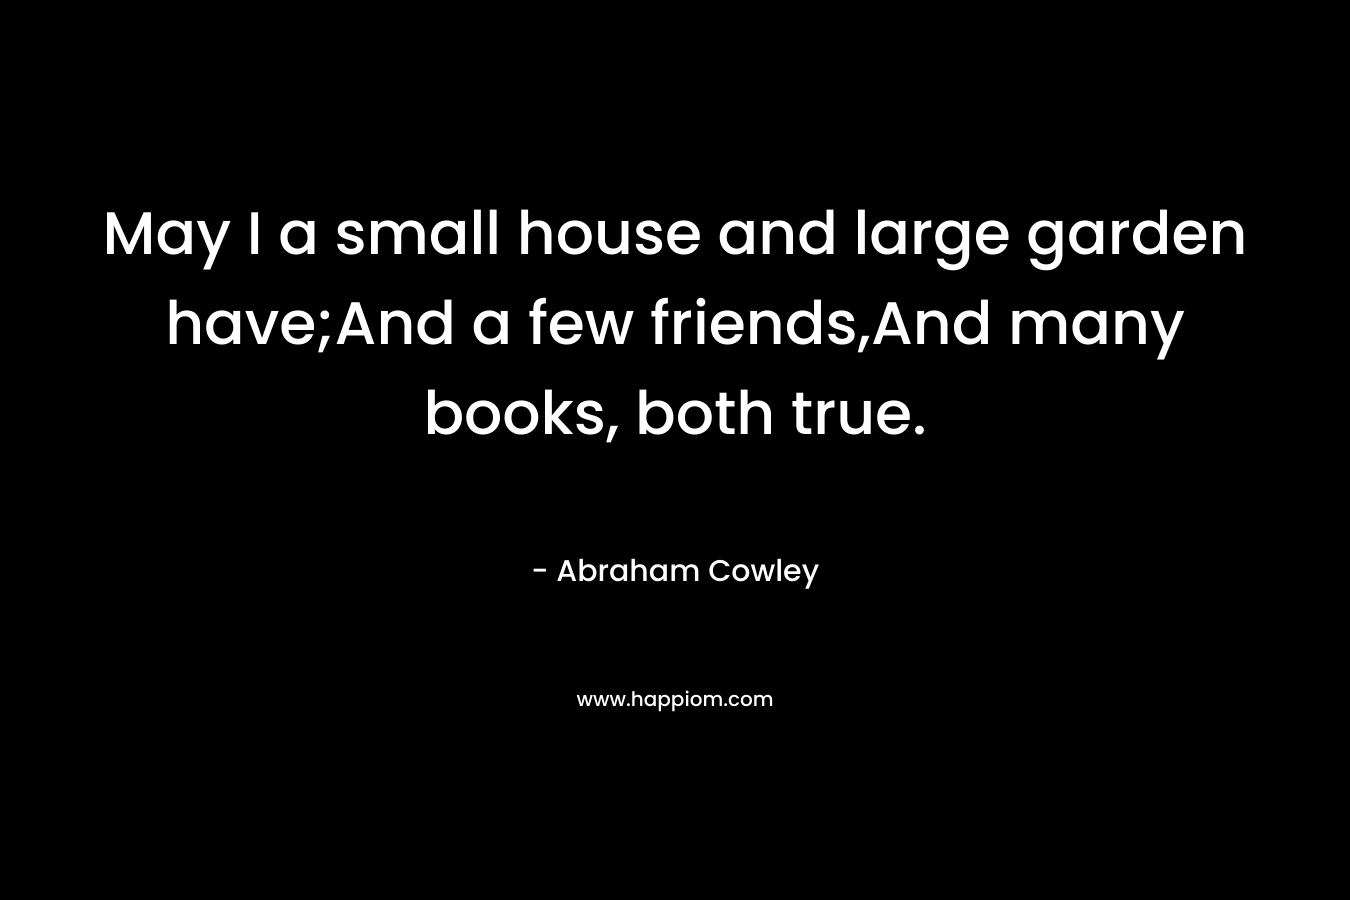 May I a small house and large garden have;And a few friends,And many books, both true. – Abraham Cowley